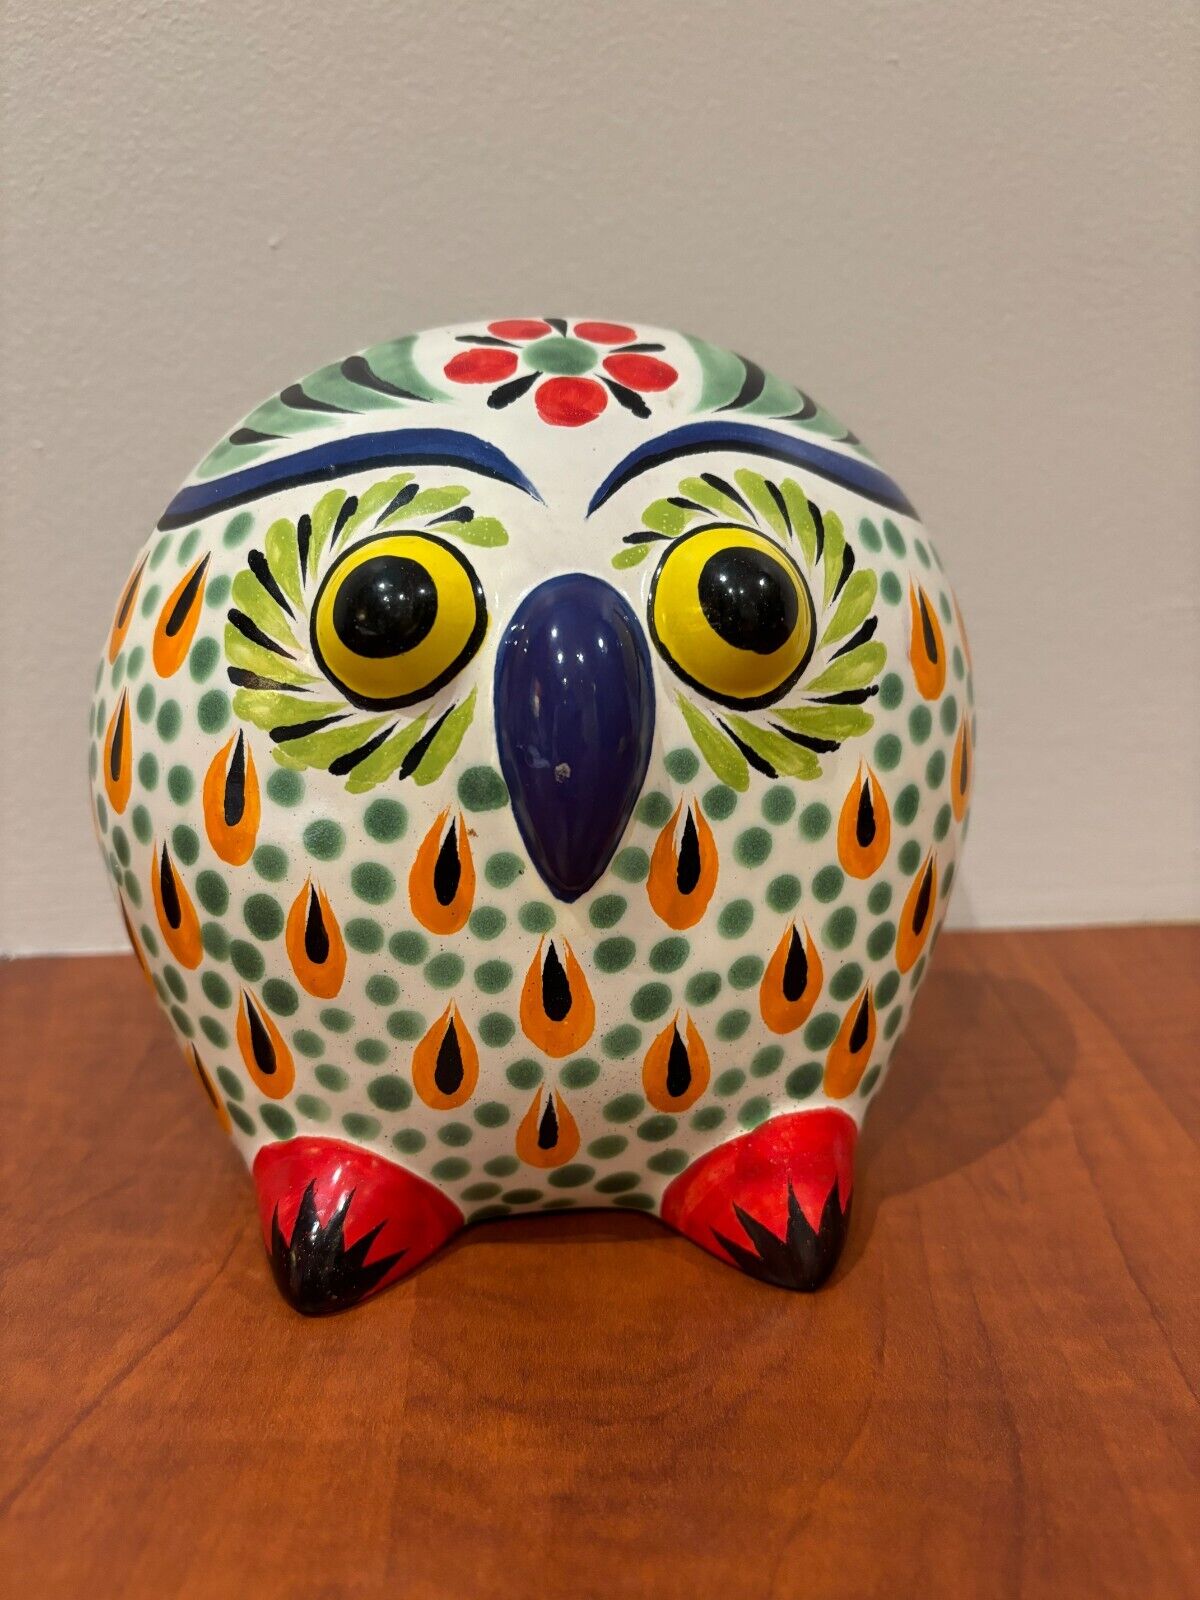 Adorable Vintage Ceramic Mexican Owl Bank-7 inches tall